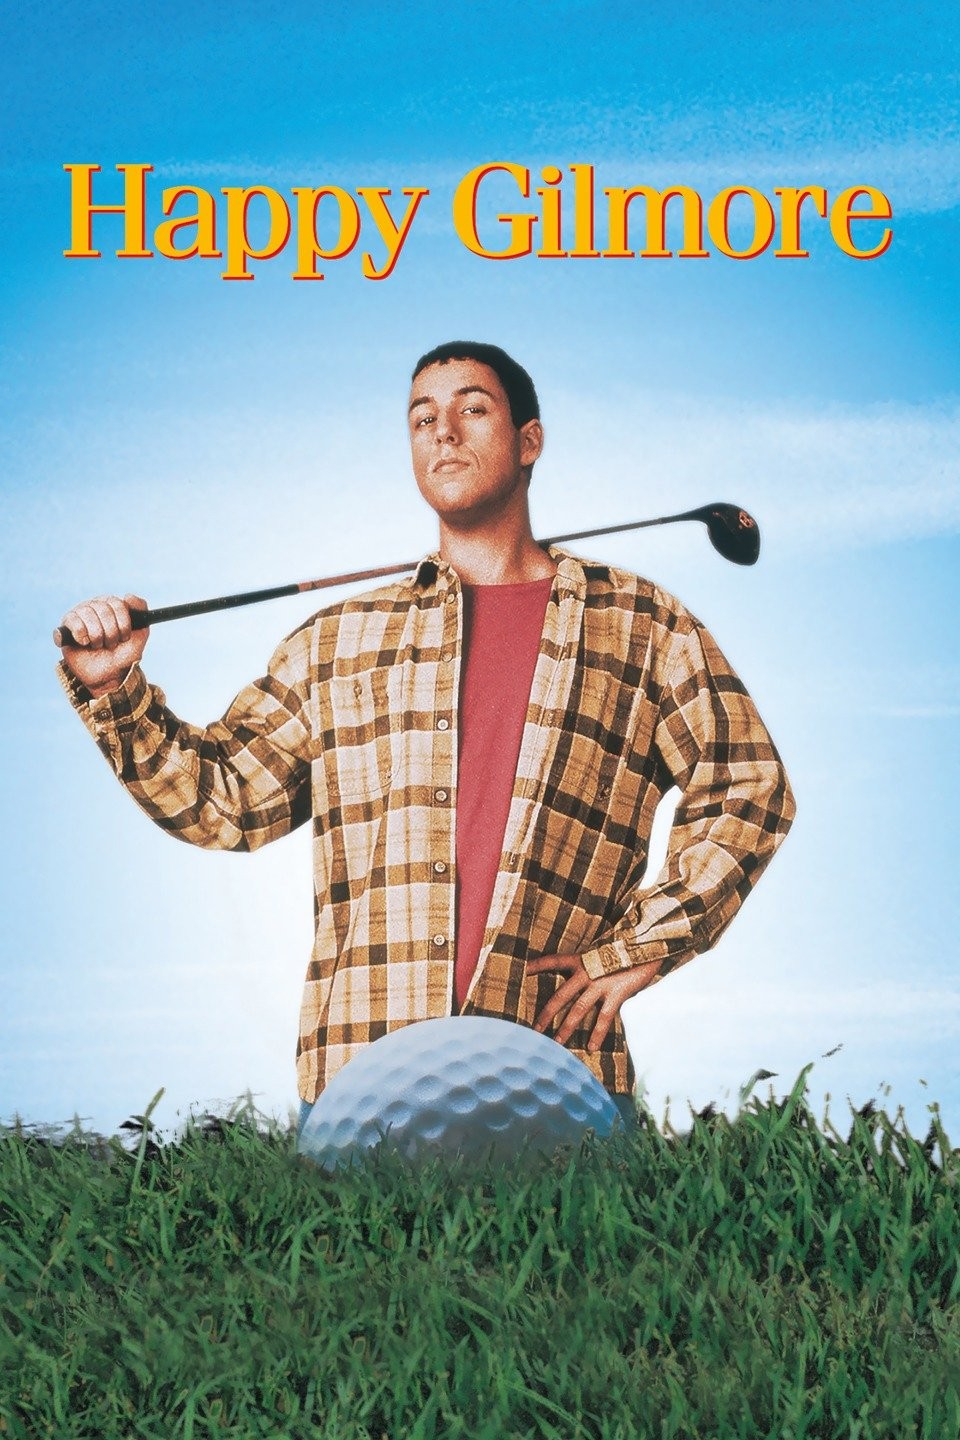 5 Things You Can Learn From Happy Gilmore